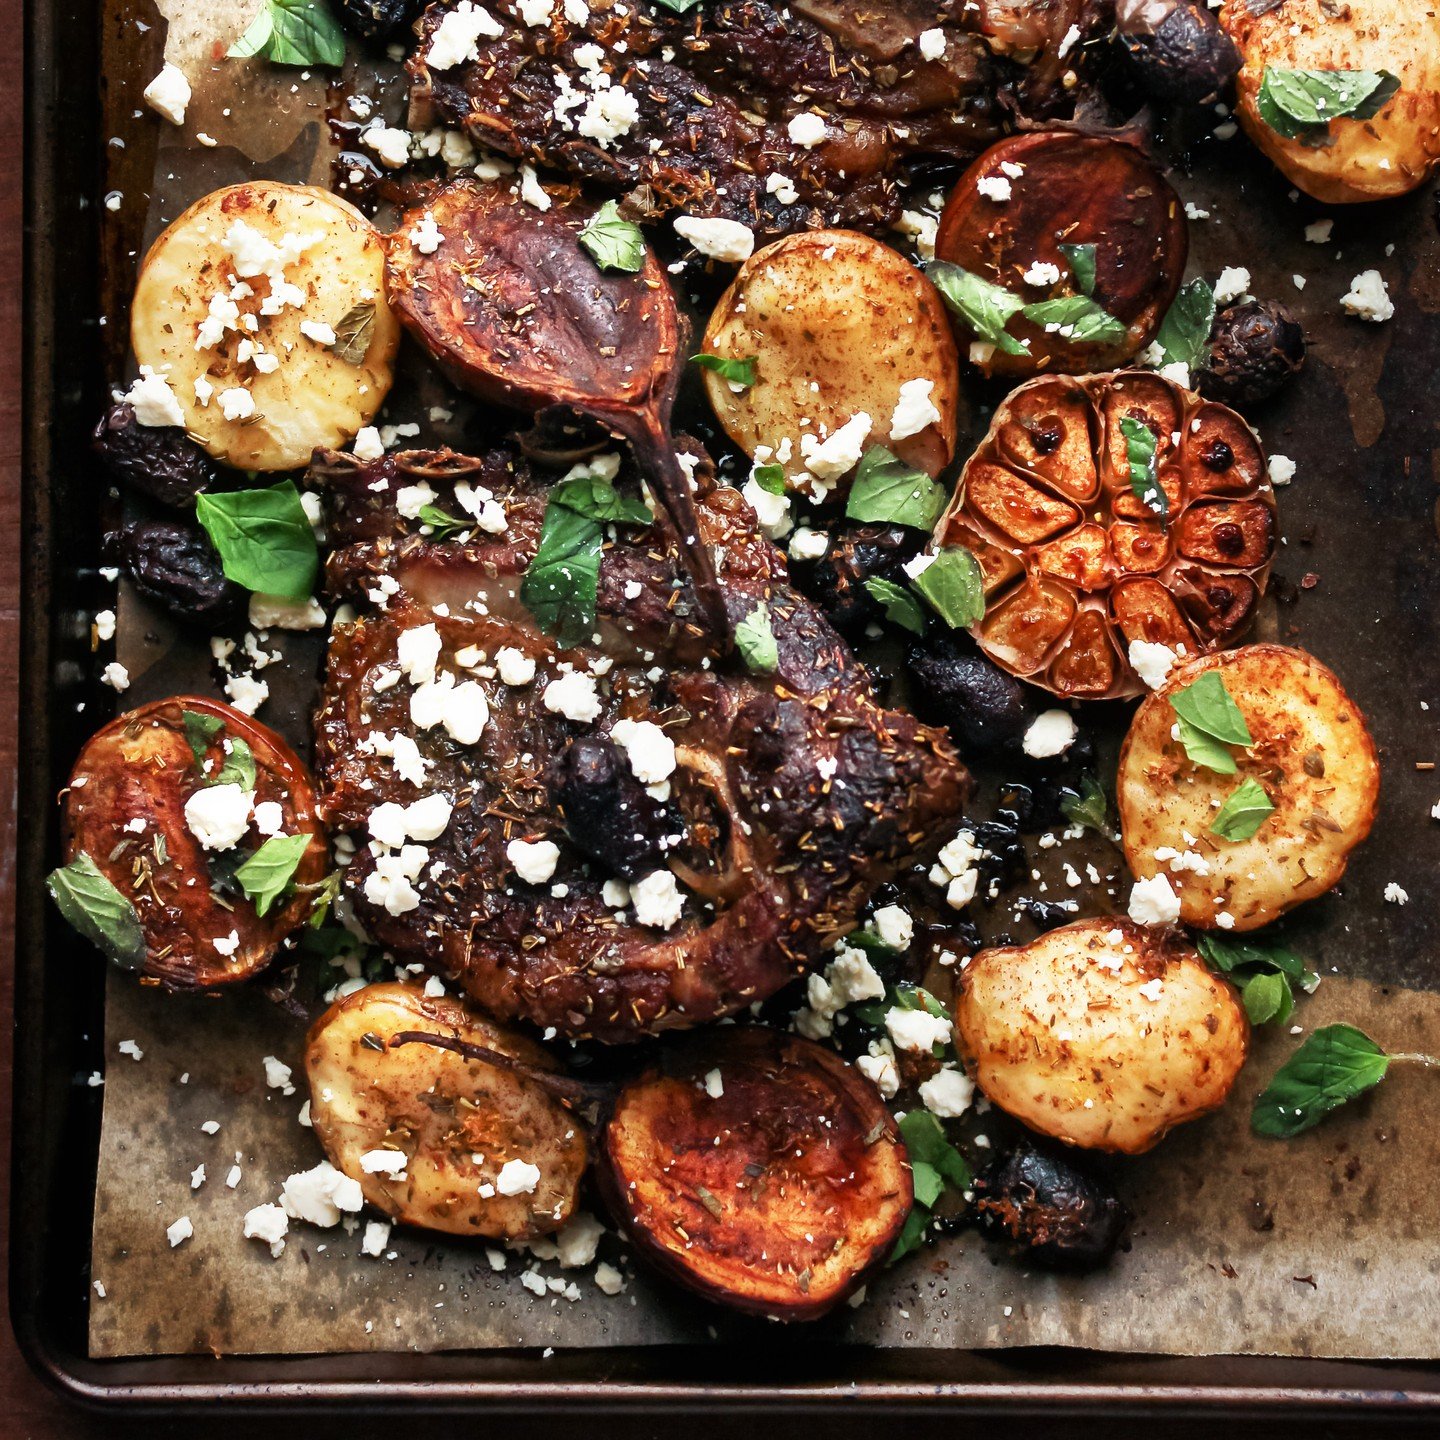 Greek lamb tray bake, with eggplants, potatoes, olives and feta.

This brown chaos is one of my favourite things to make, cook and eat. It's not pretending to be real Greek food, but brings together some of its greatest hits as ingredients.

It's inc